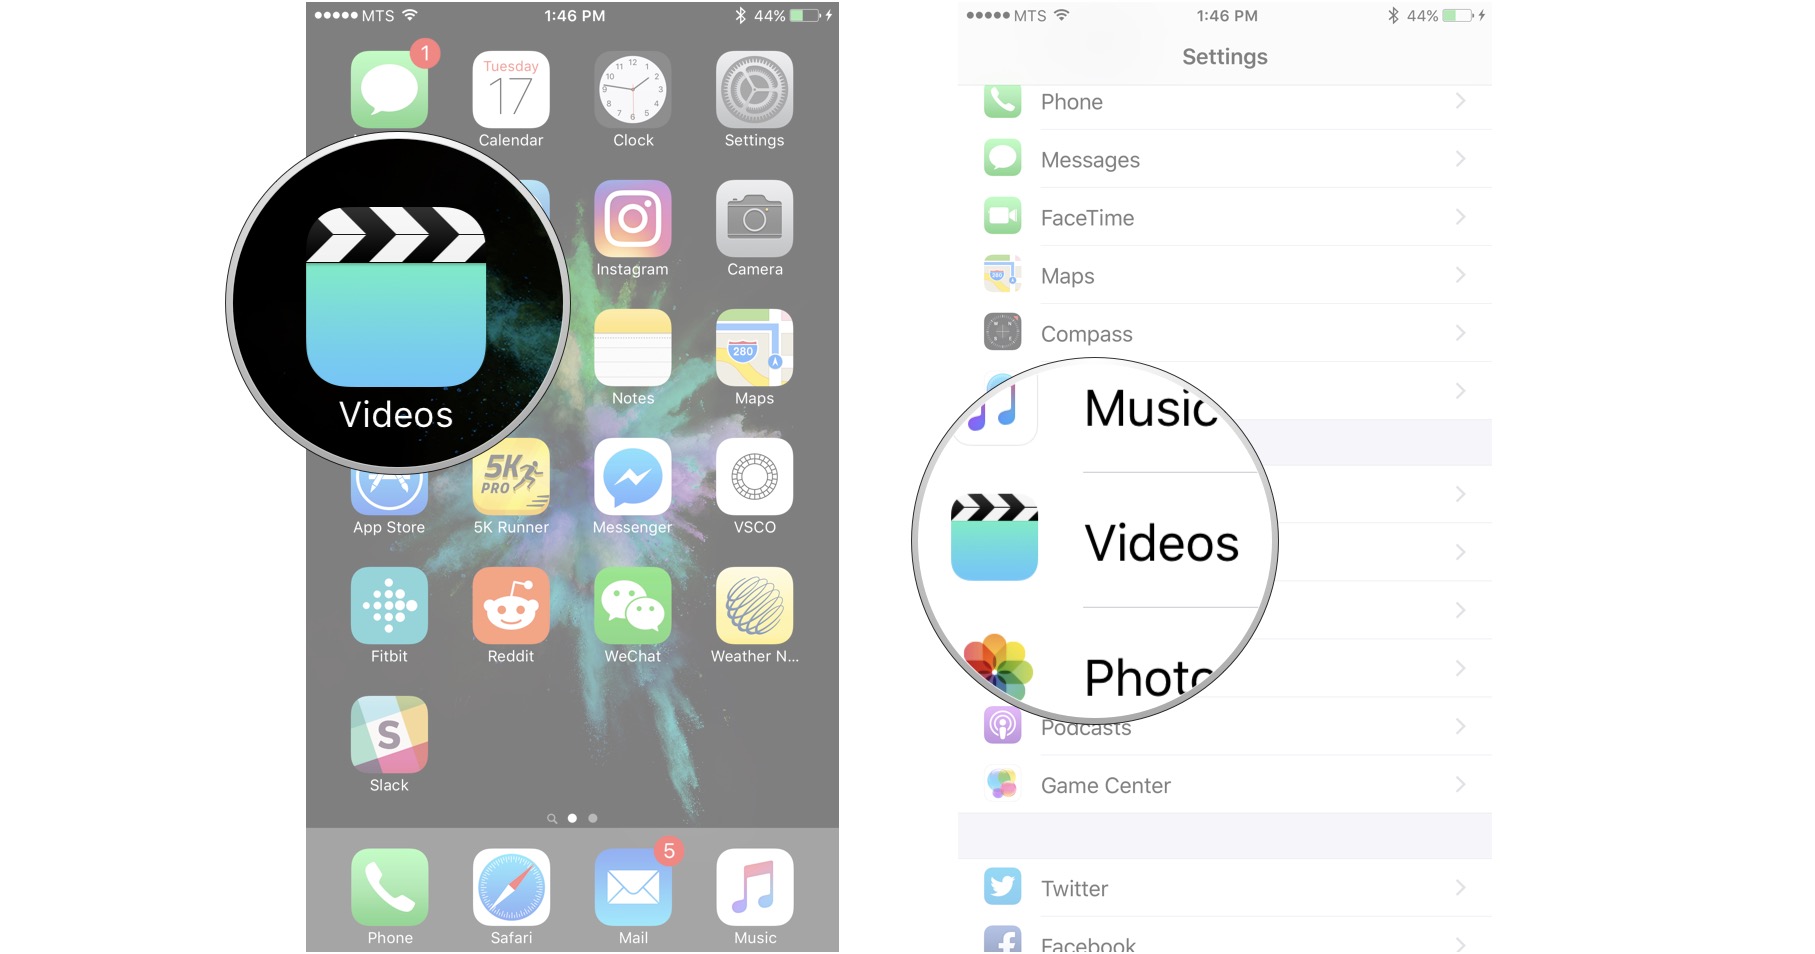 Launch the Settings app from your Home screen, and then tap on Videos.